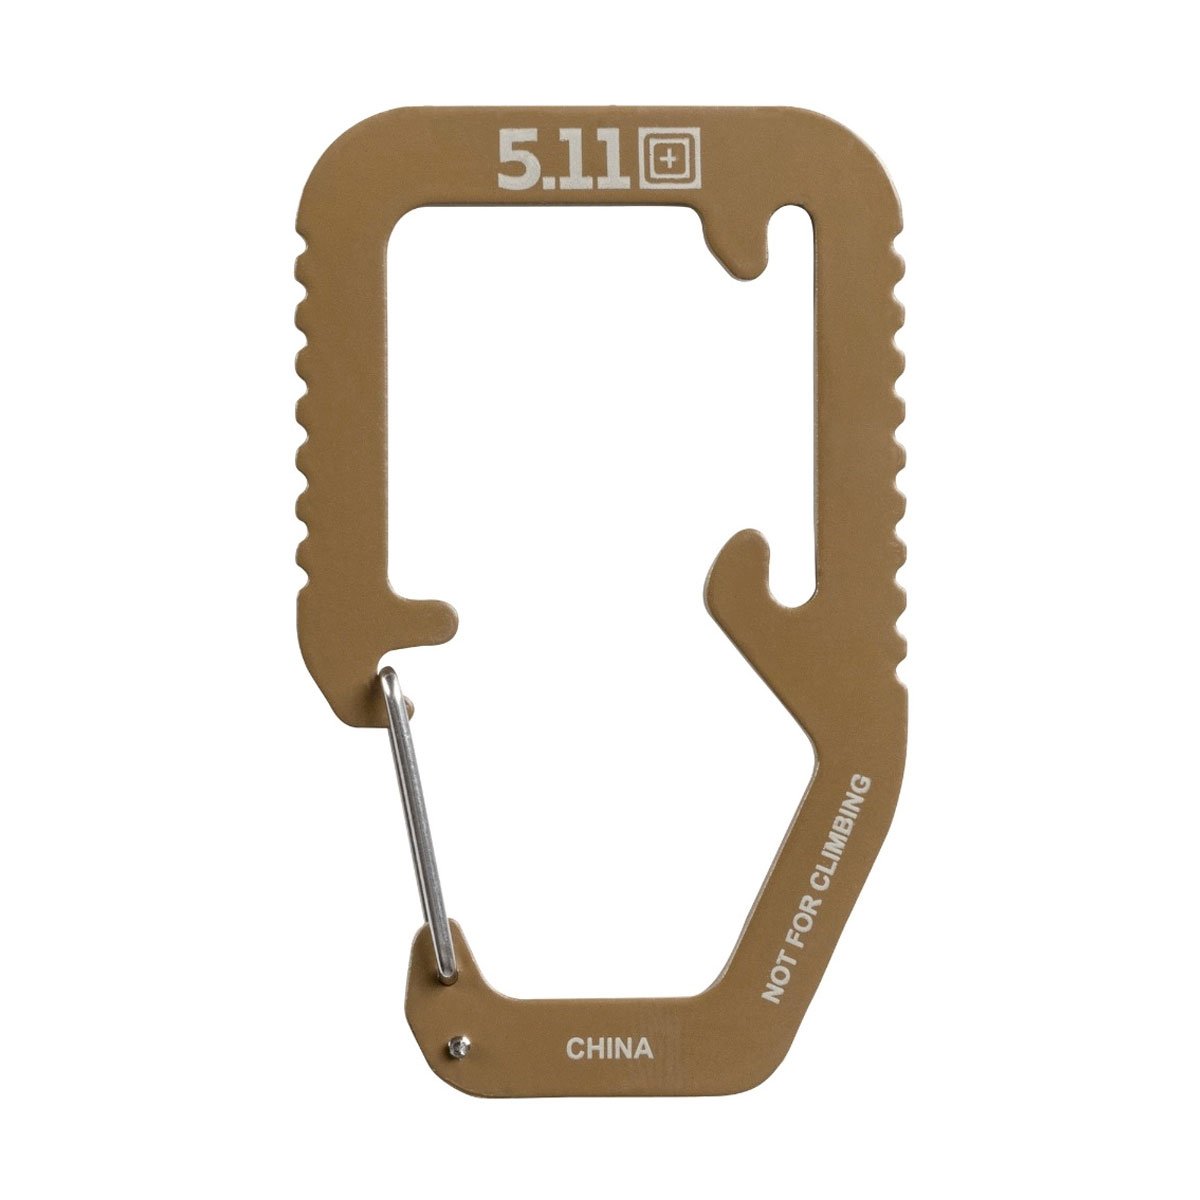 5.11 Tactical Hardpoint M2 Carabiner Outdoor and Survival 5.11 Tactical Tactical Gear Supplier Tactical Distributors Australia